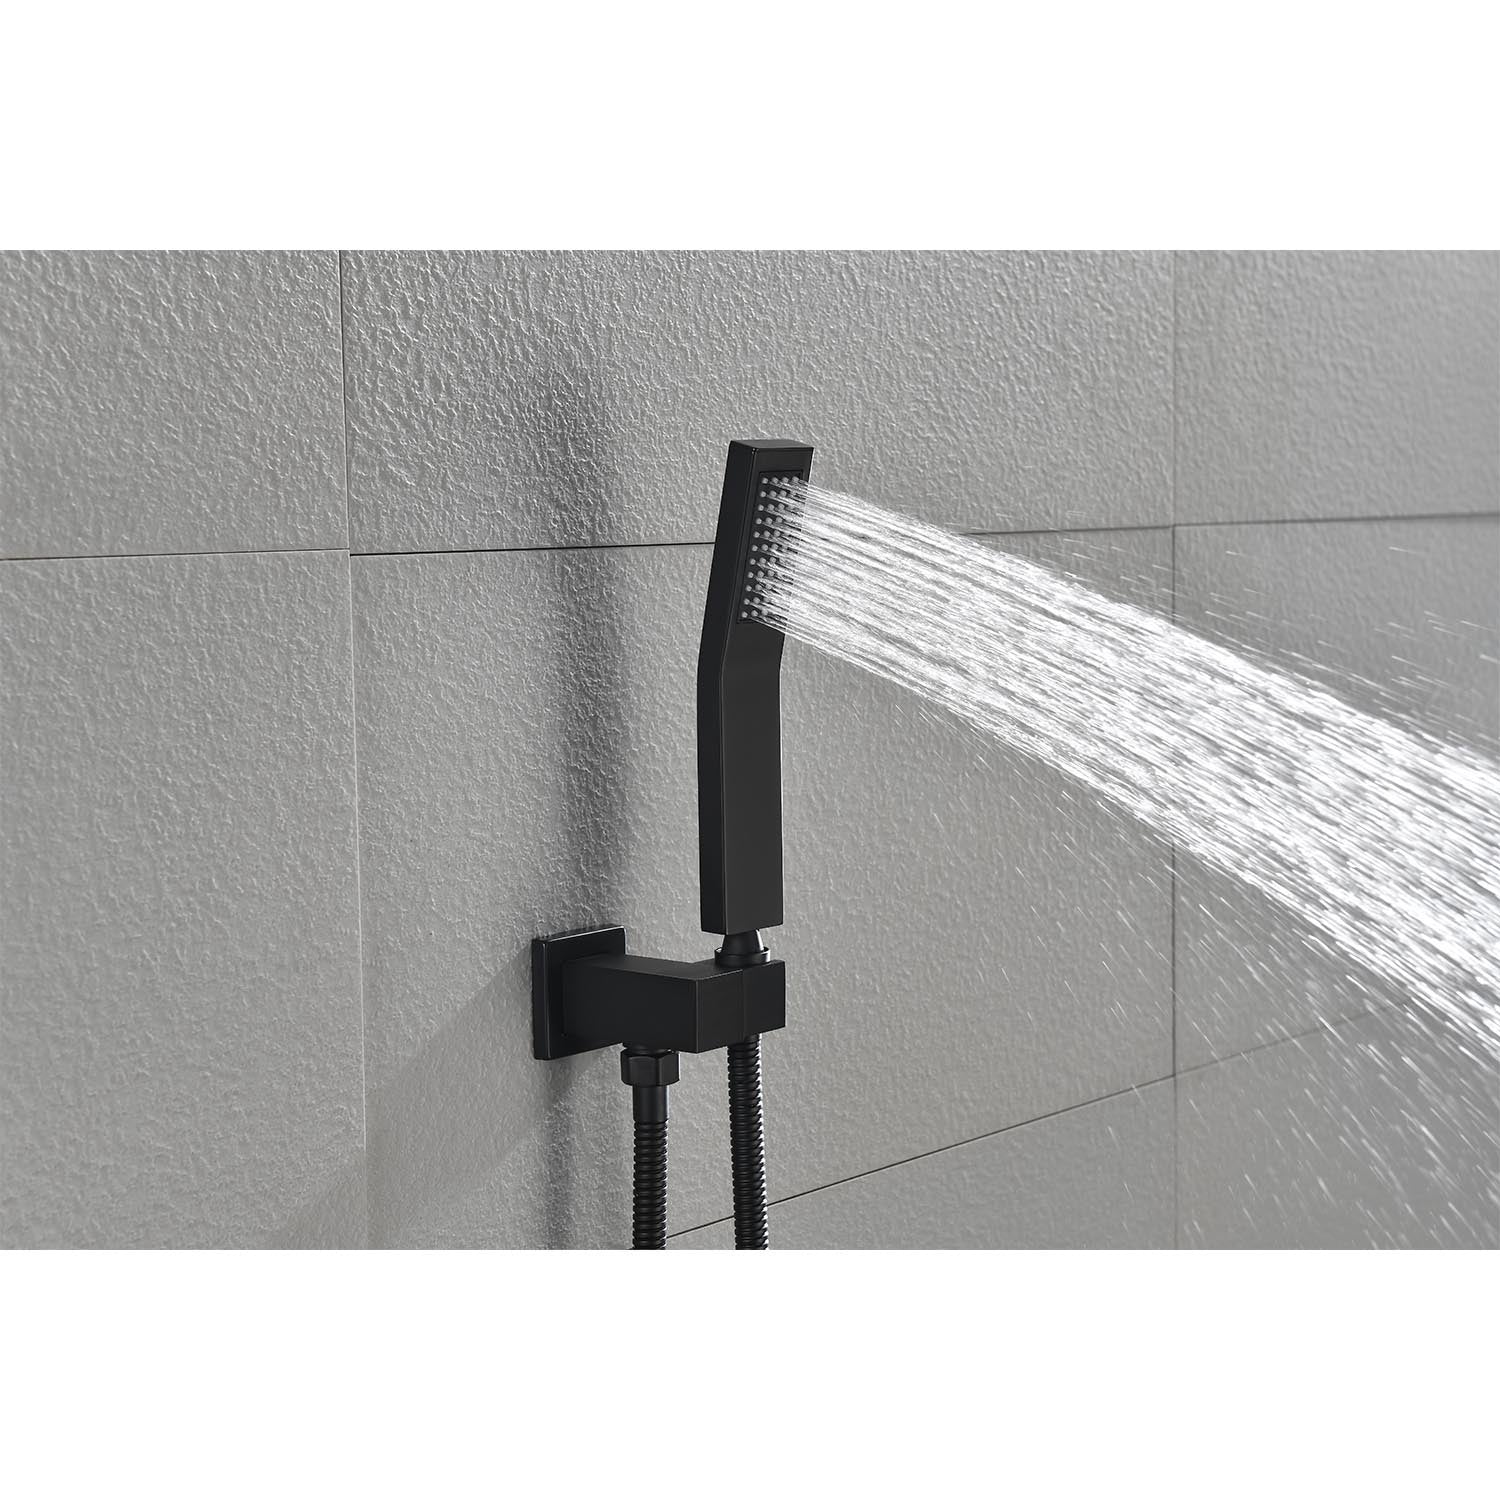 10" Rain Shower Head Systems Wall Mounted Shower